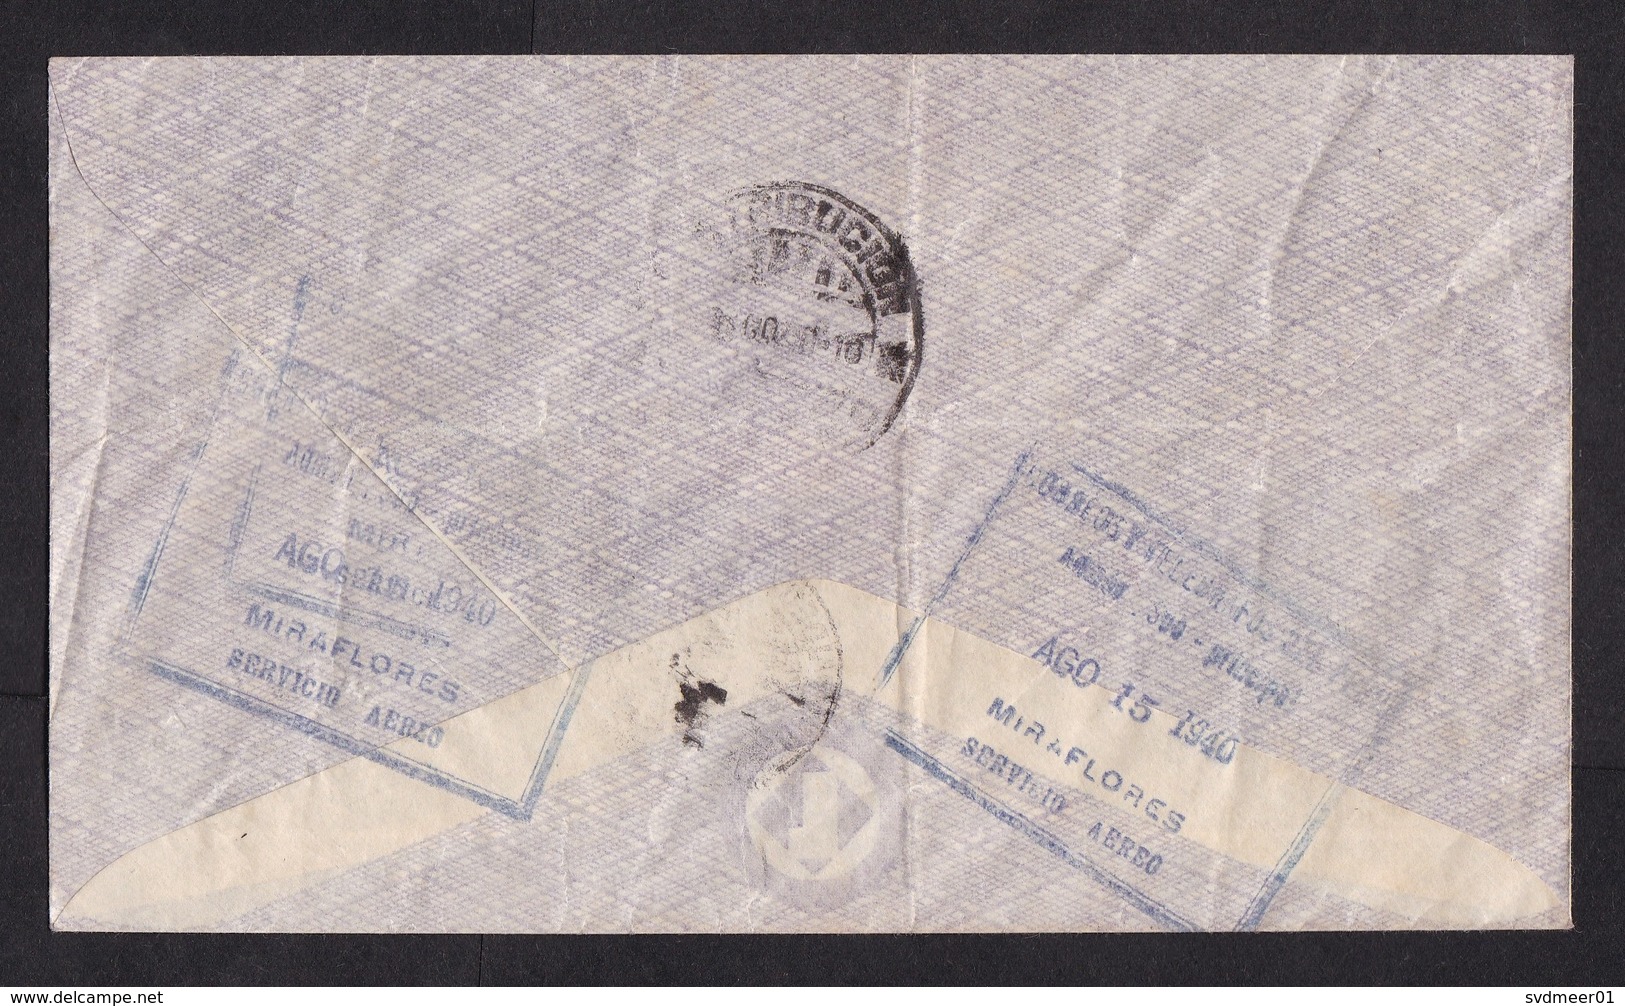 Peru: Cover To Uruguay, 1940, 3 Stamps, Special Diplomatic Rate, Sent By Embassy, Diplomacy (damaged; Folds) - Peru